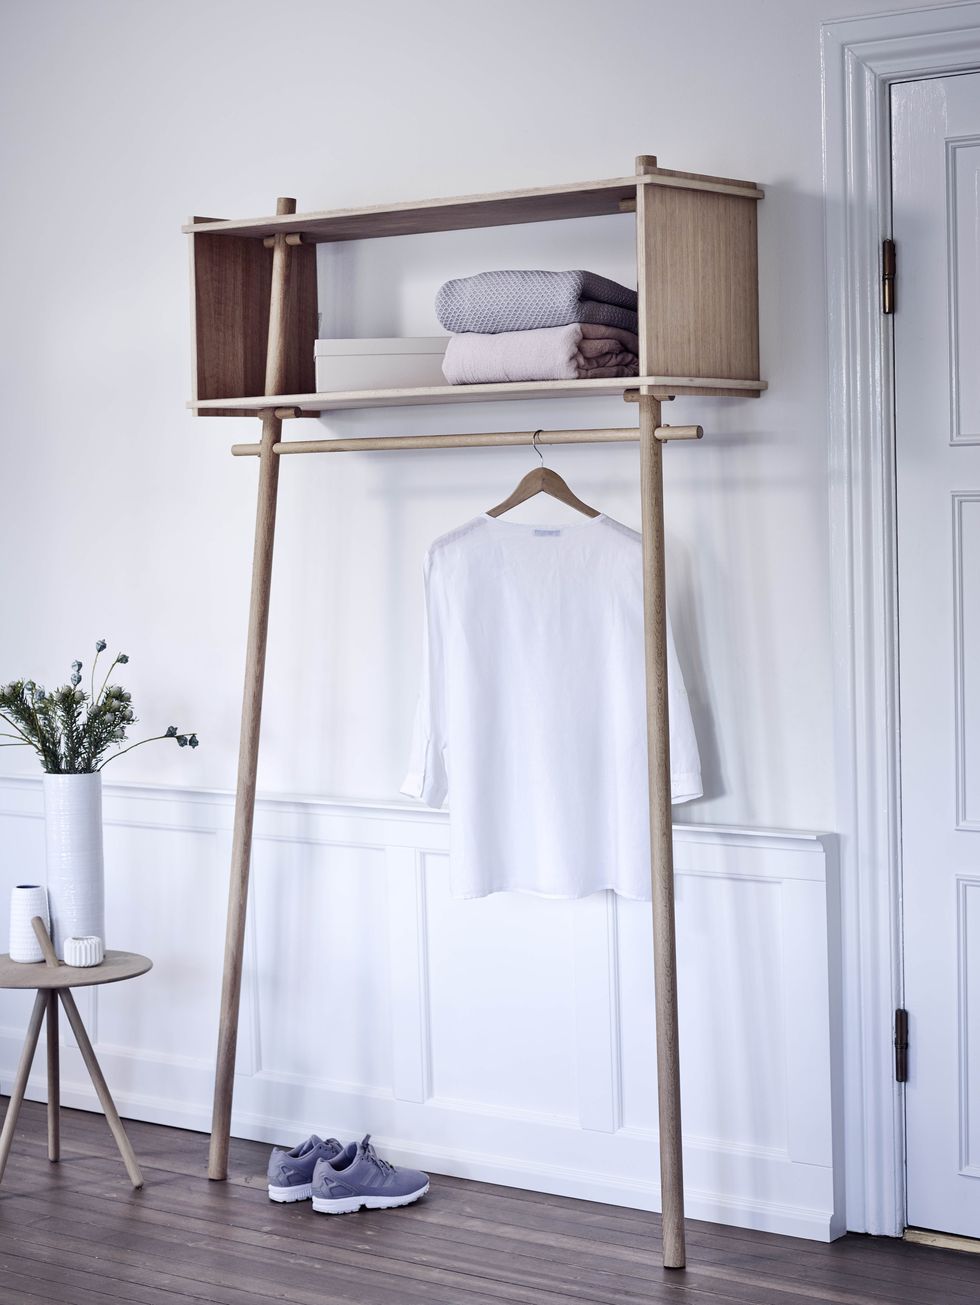 The beautiful Woud Tojbox Clothes Rack Small, designed by Made by Michael, contains all of the functionality and craftsmanship of the original, just in a slightly smaller form.